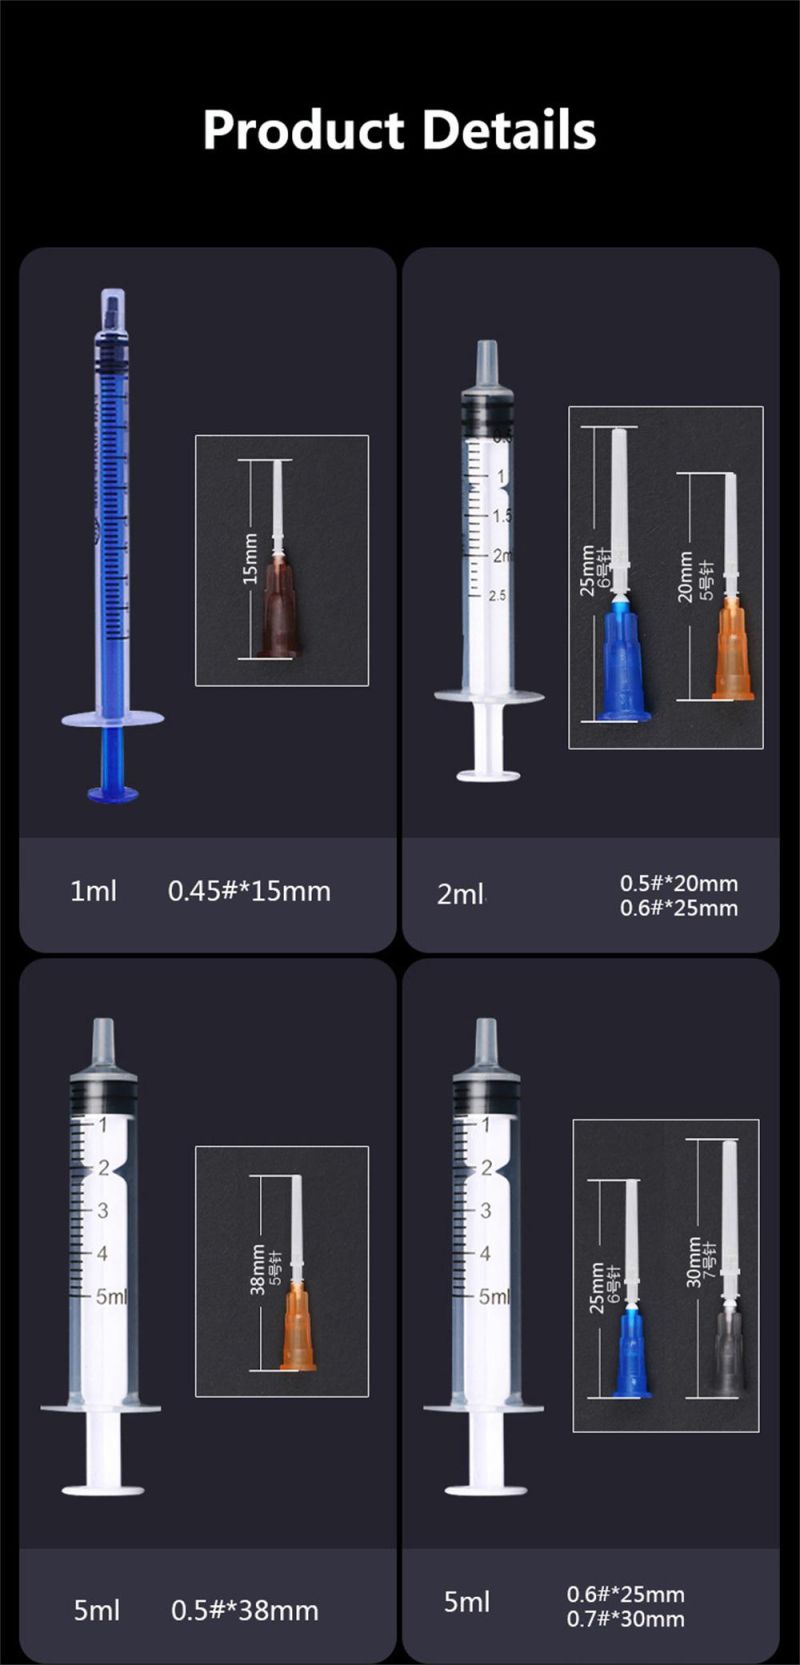 Syringe with Needles, Industrial Syringes with Mearsurement, Disposable Plastic Syringe for Industrial Use, Garden, Painting, Scientific Labs